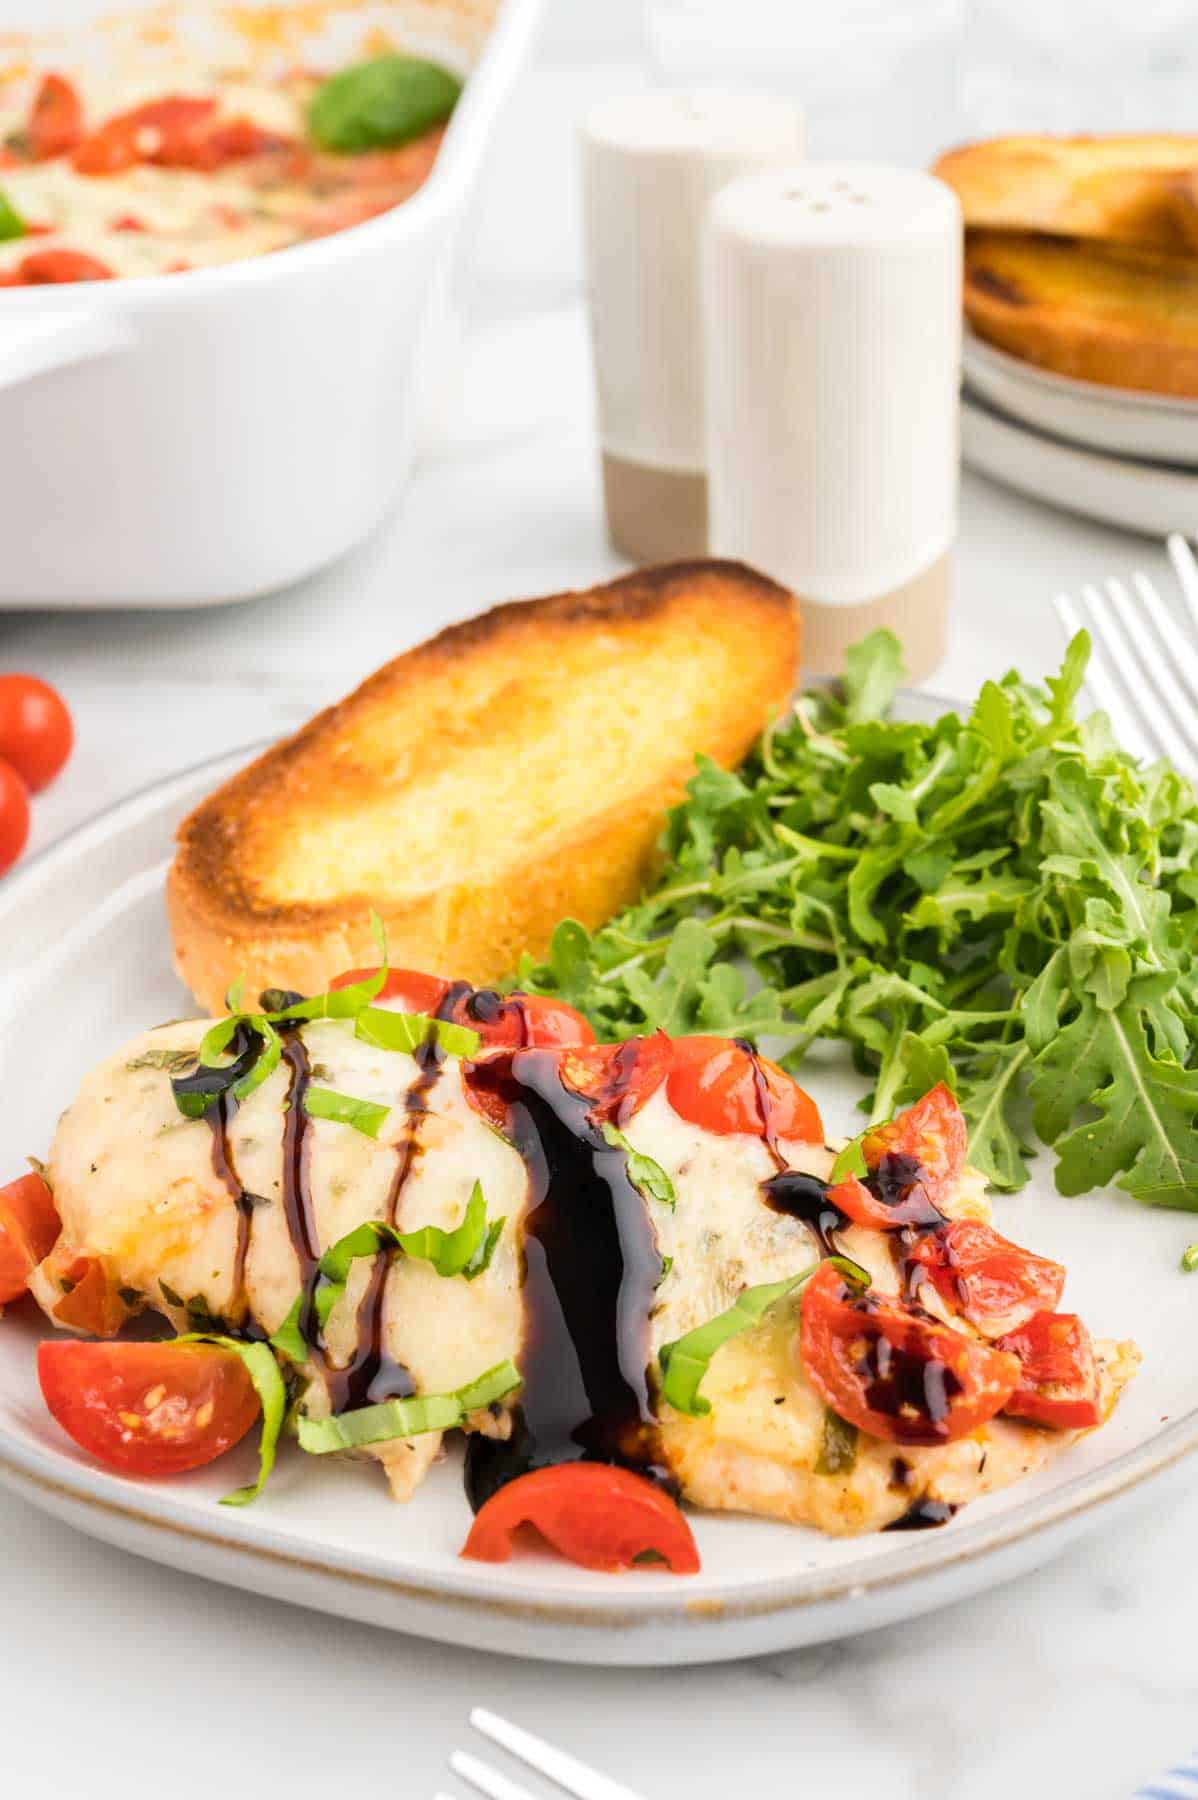 Bruschetta Chicken Bake is a simple baked chicken breast recipe loaded with cherry tomatoes, fresh basil, garlic and melty mozzarella cheese.